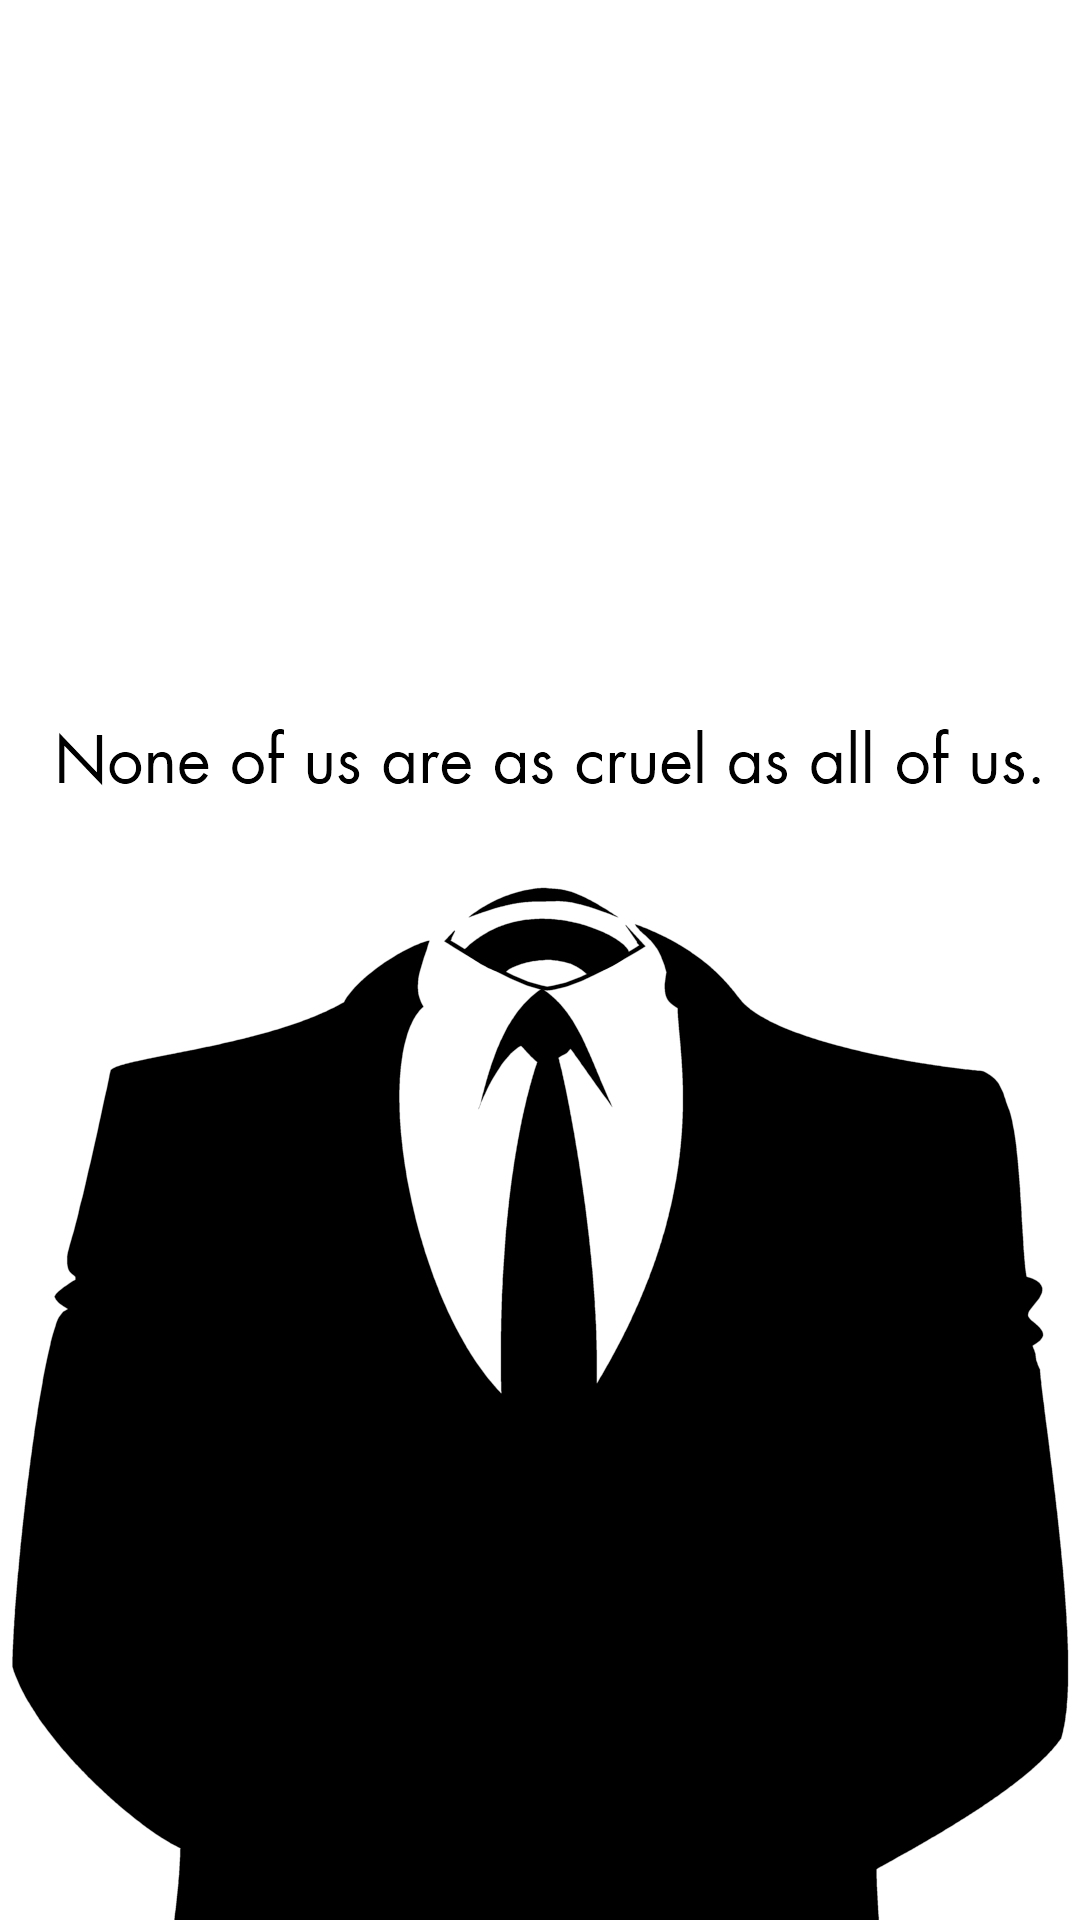 Anonymous Quotes Wallpaper For Iphone - Cruel Wallpaper Hd Iphone - HD Wallpaper 